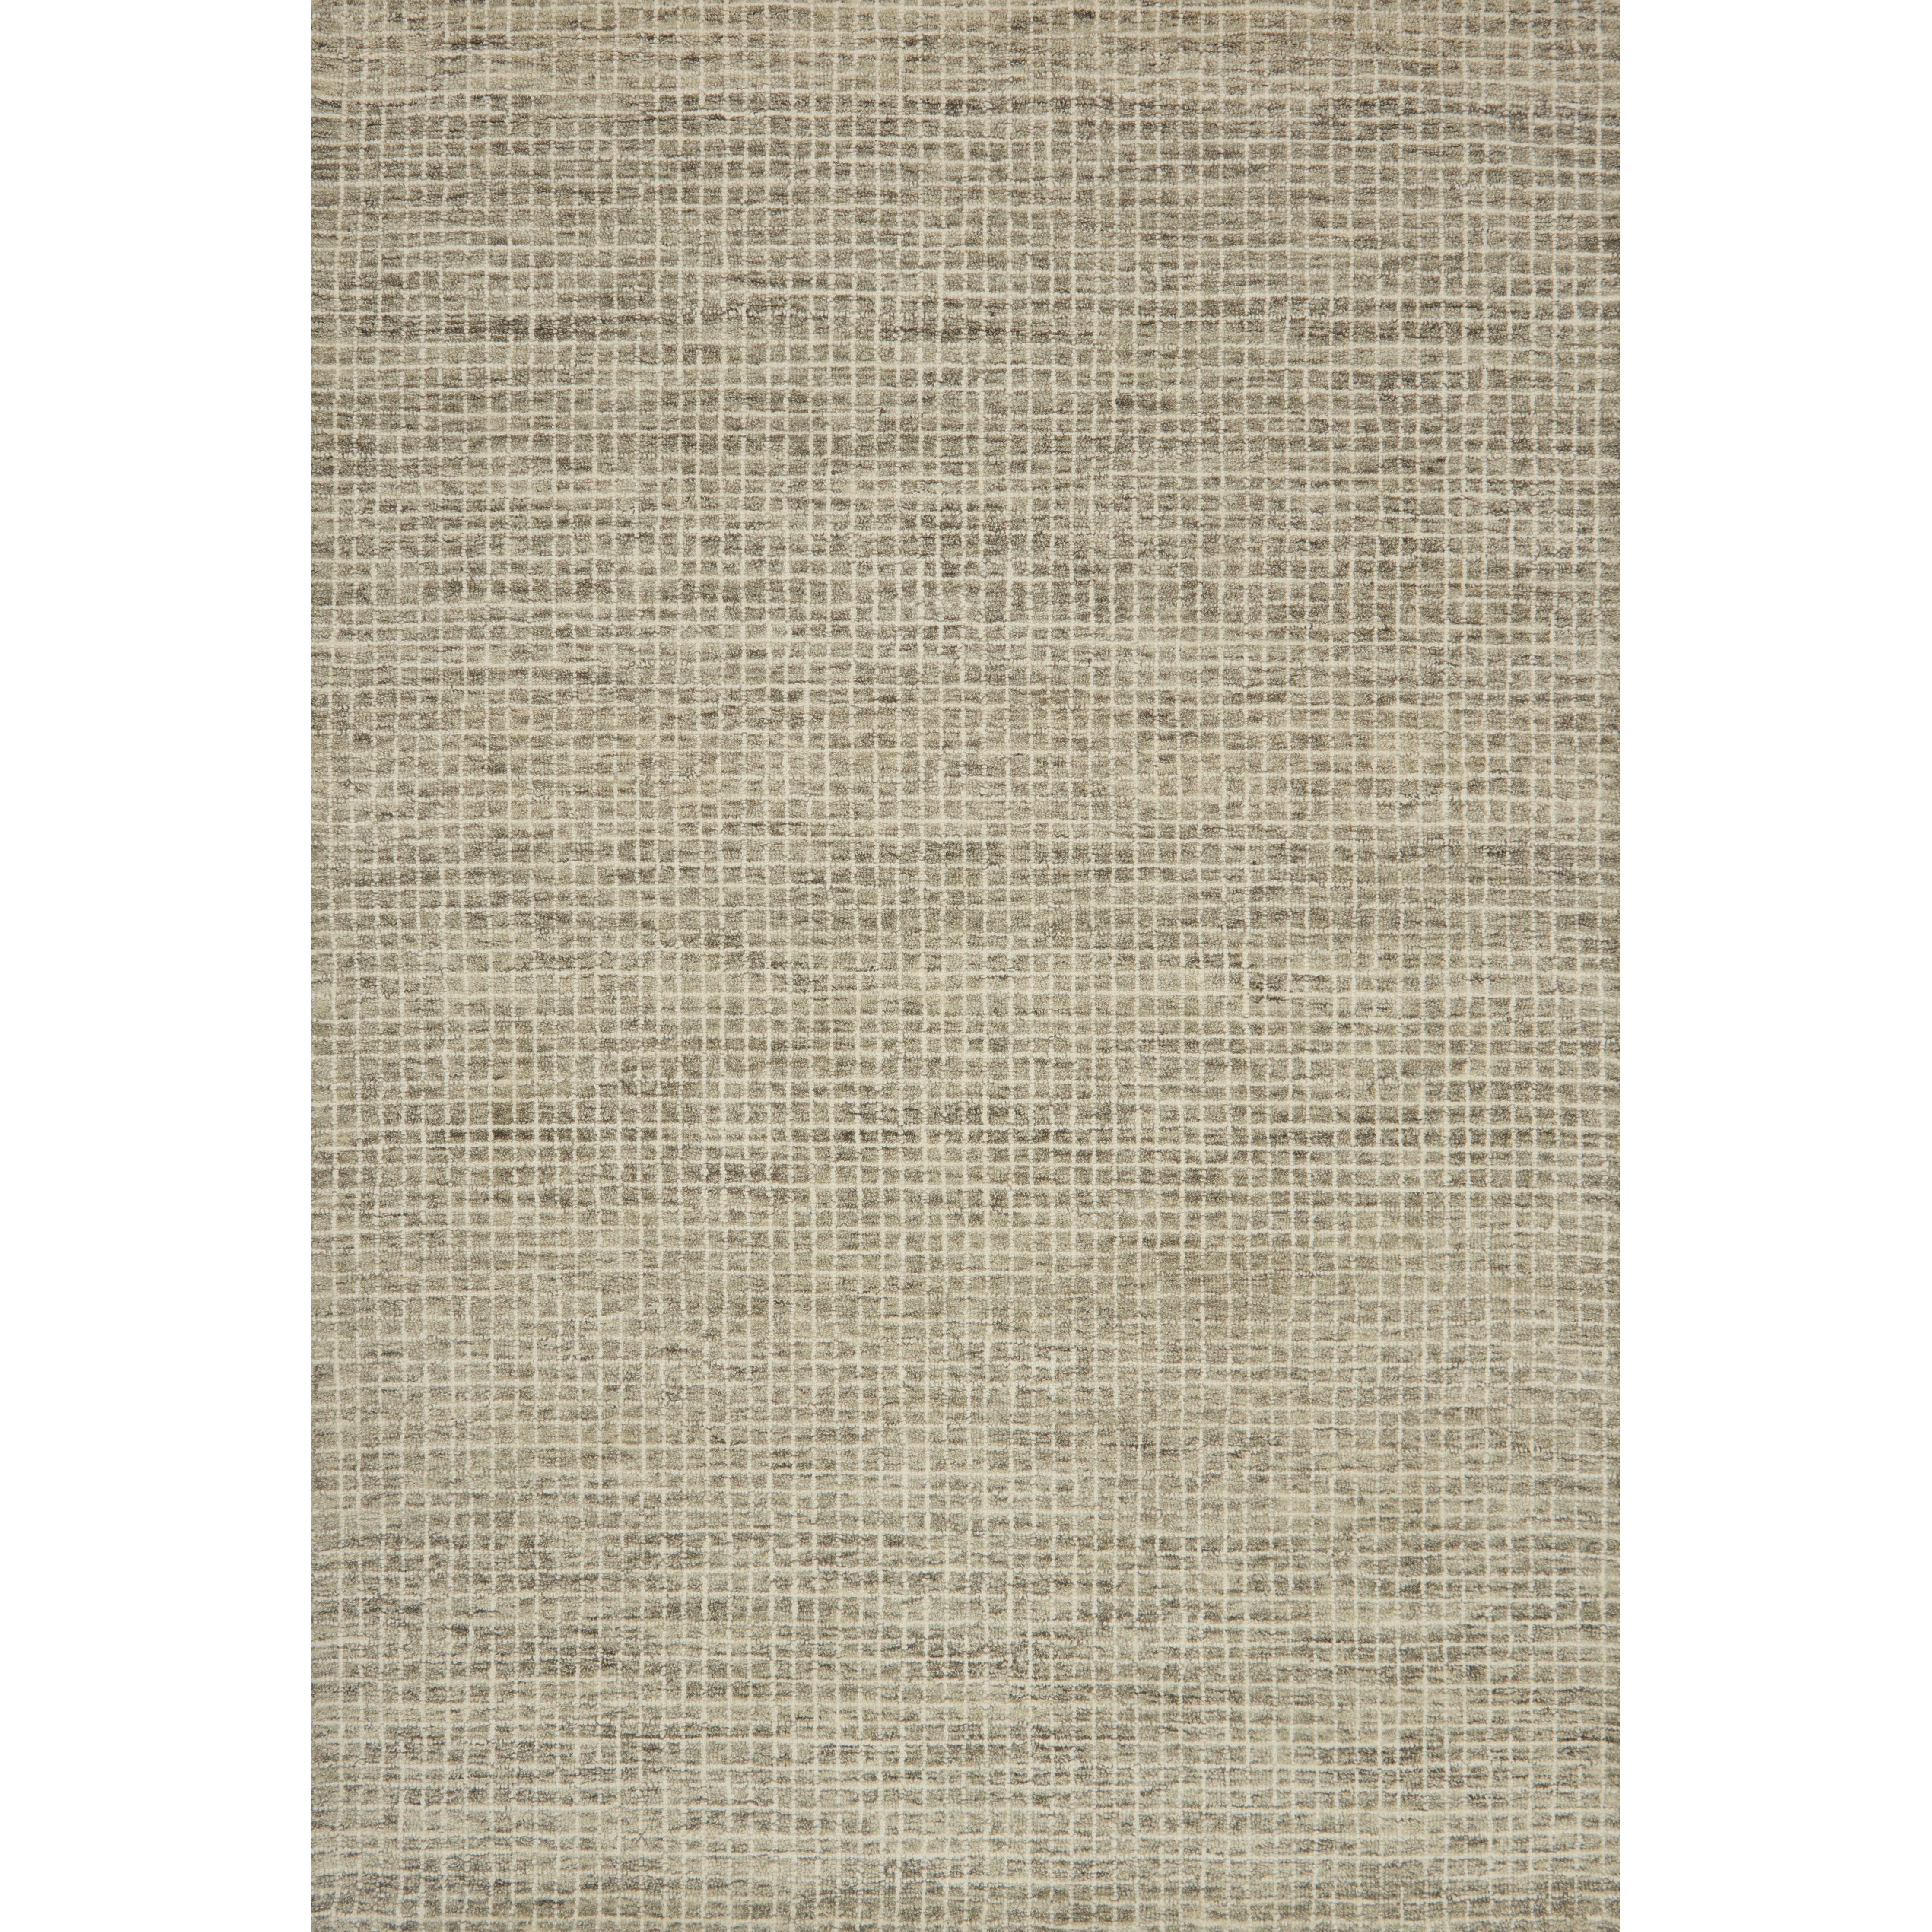 The Giana Granite Area Rug, or GH-01, by Loloi combines a relaxed grid with soft variations of cream and blush for an effortless and sophisticated look. Each area rug is hooked of 100% wool by artisans for a beautiful textural layer to your home. The soft textures of this area rug bring warmth and coziness to any room.